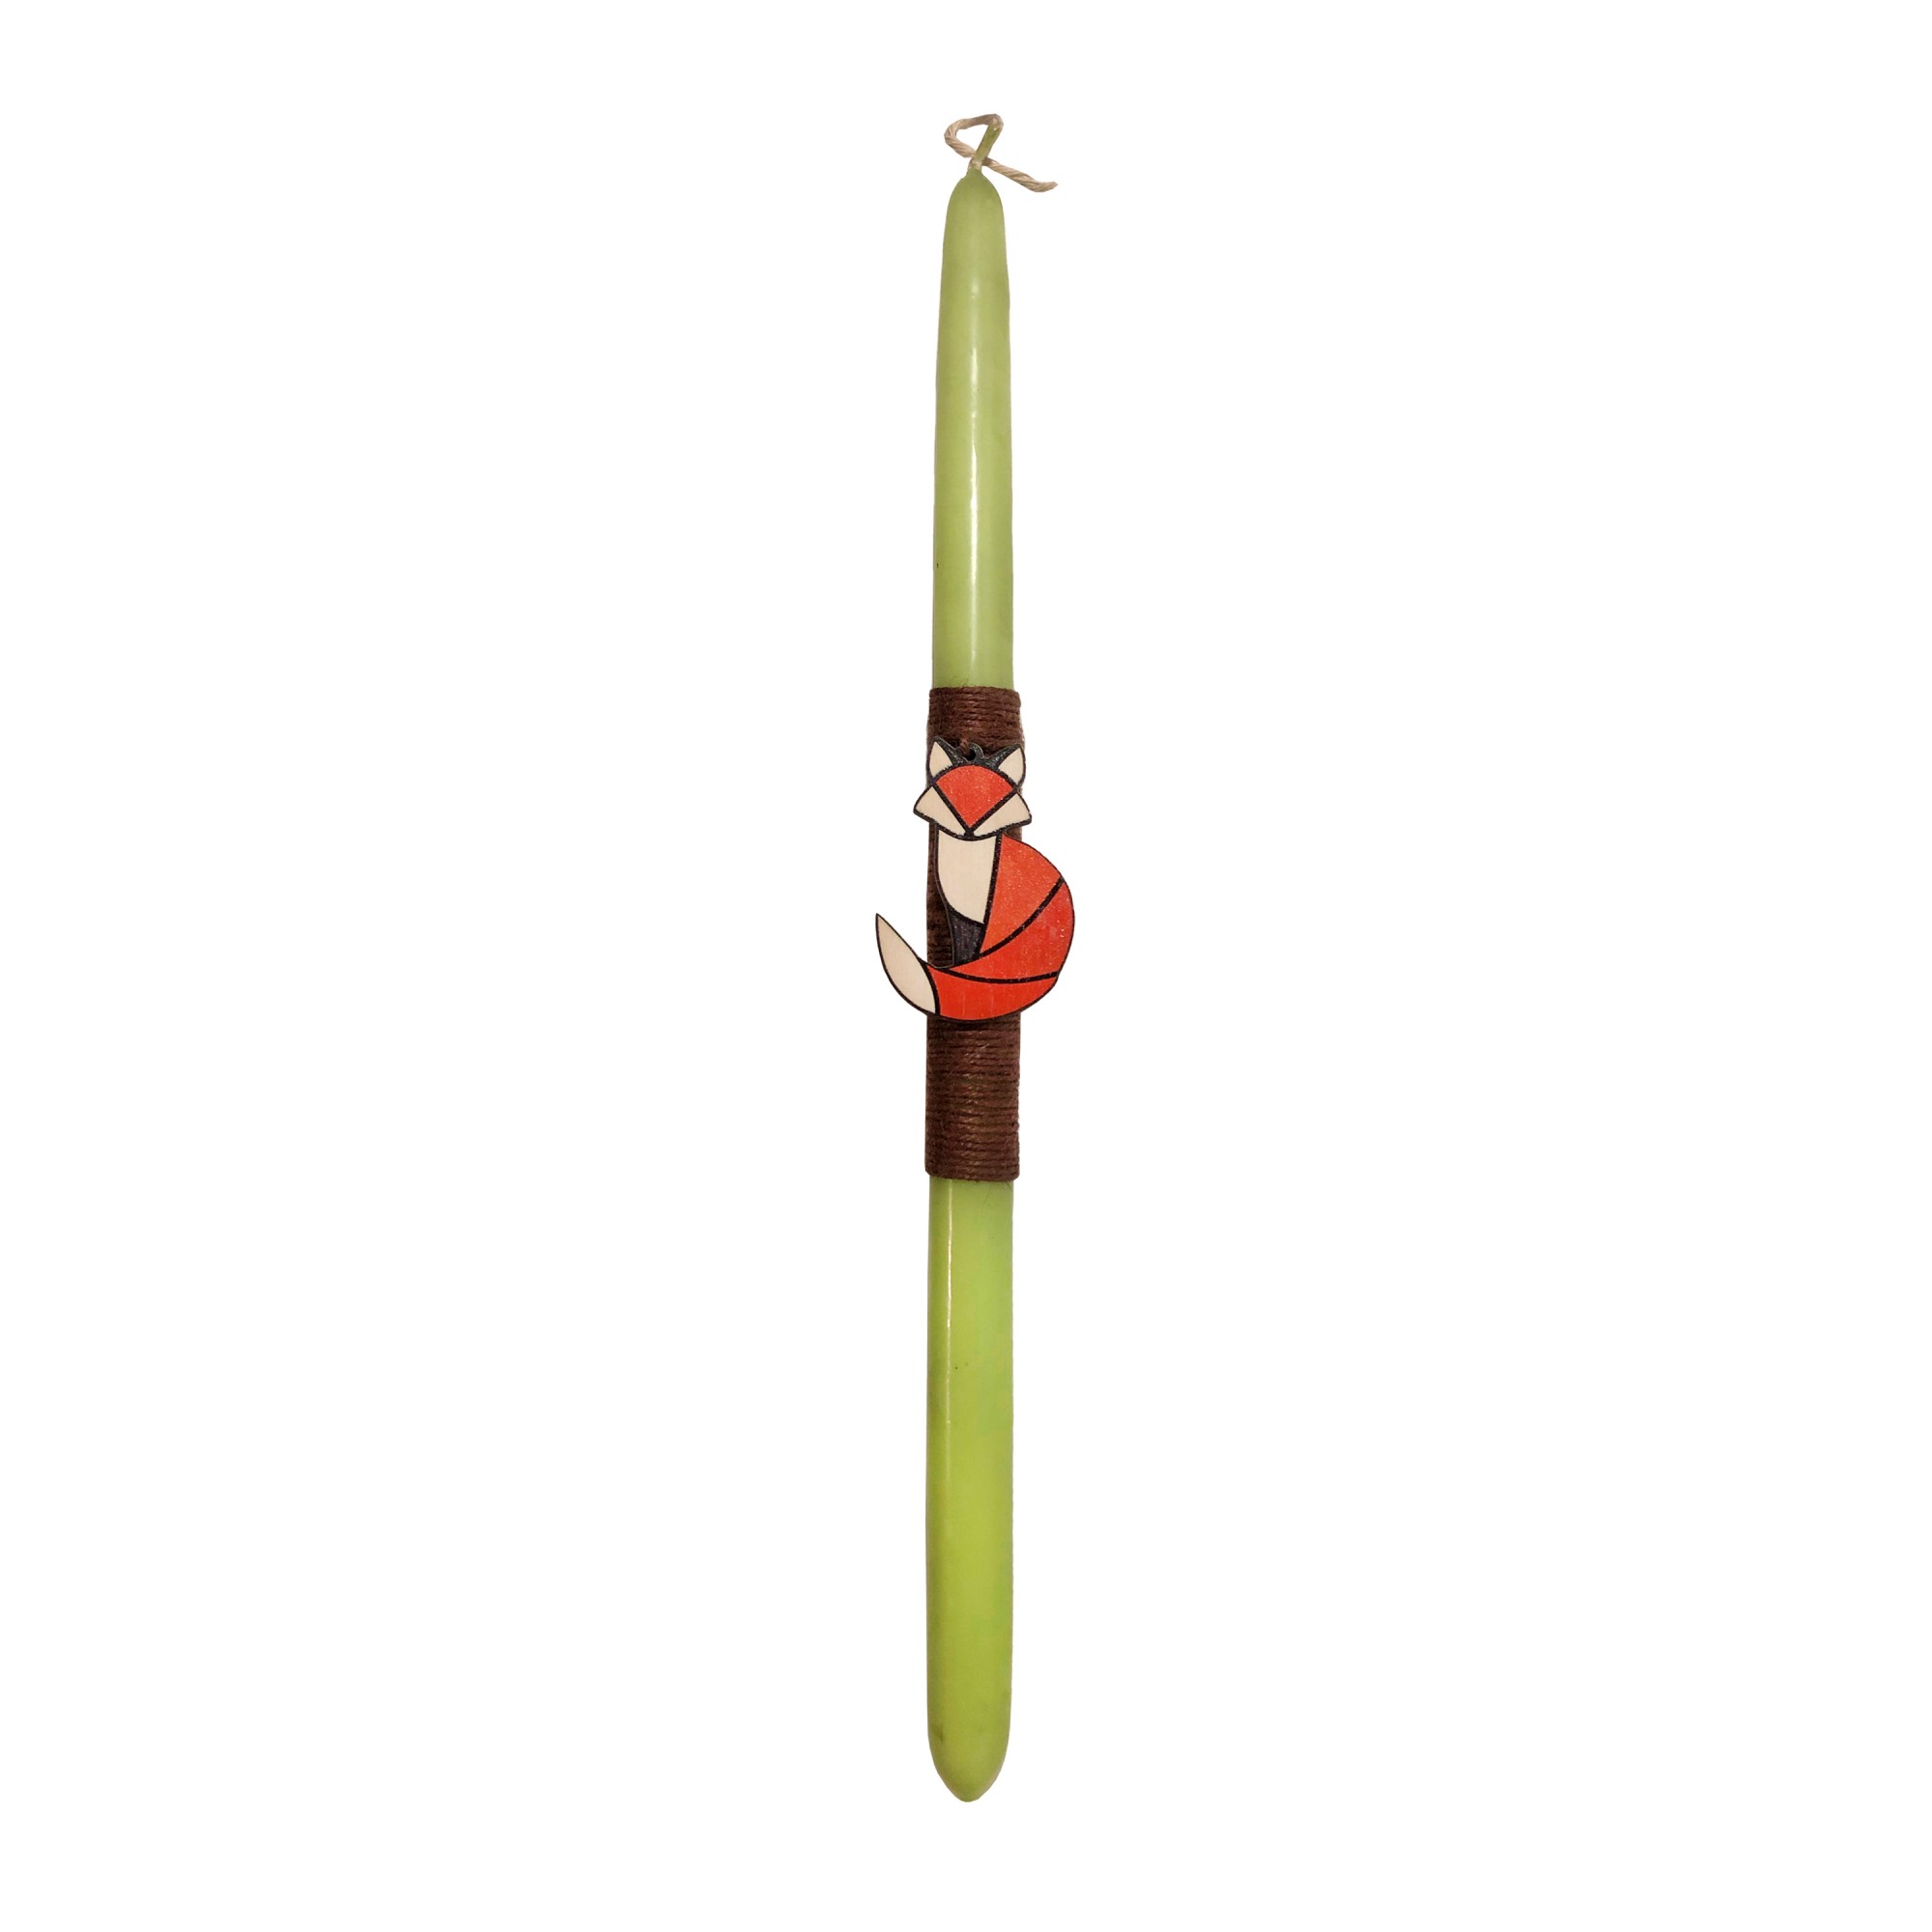 Lambada, handcrafted traditional Greek Easter candle